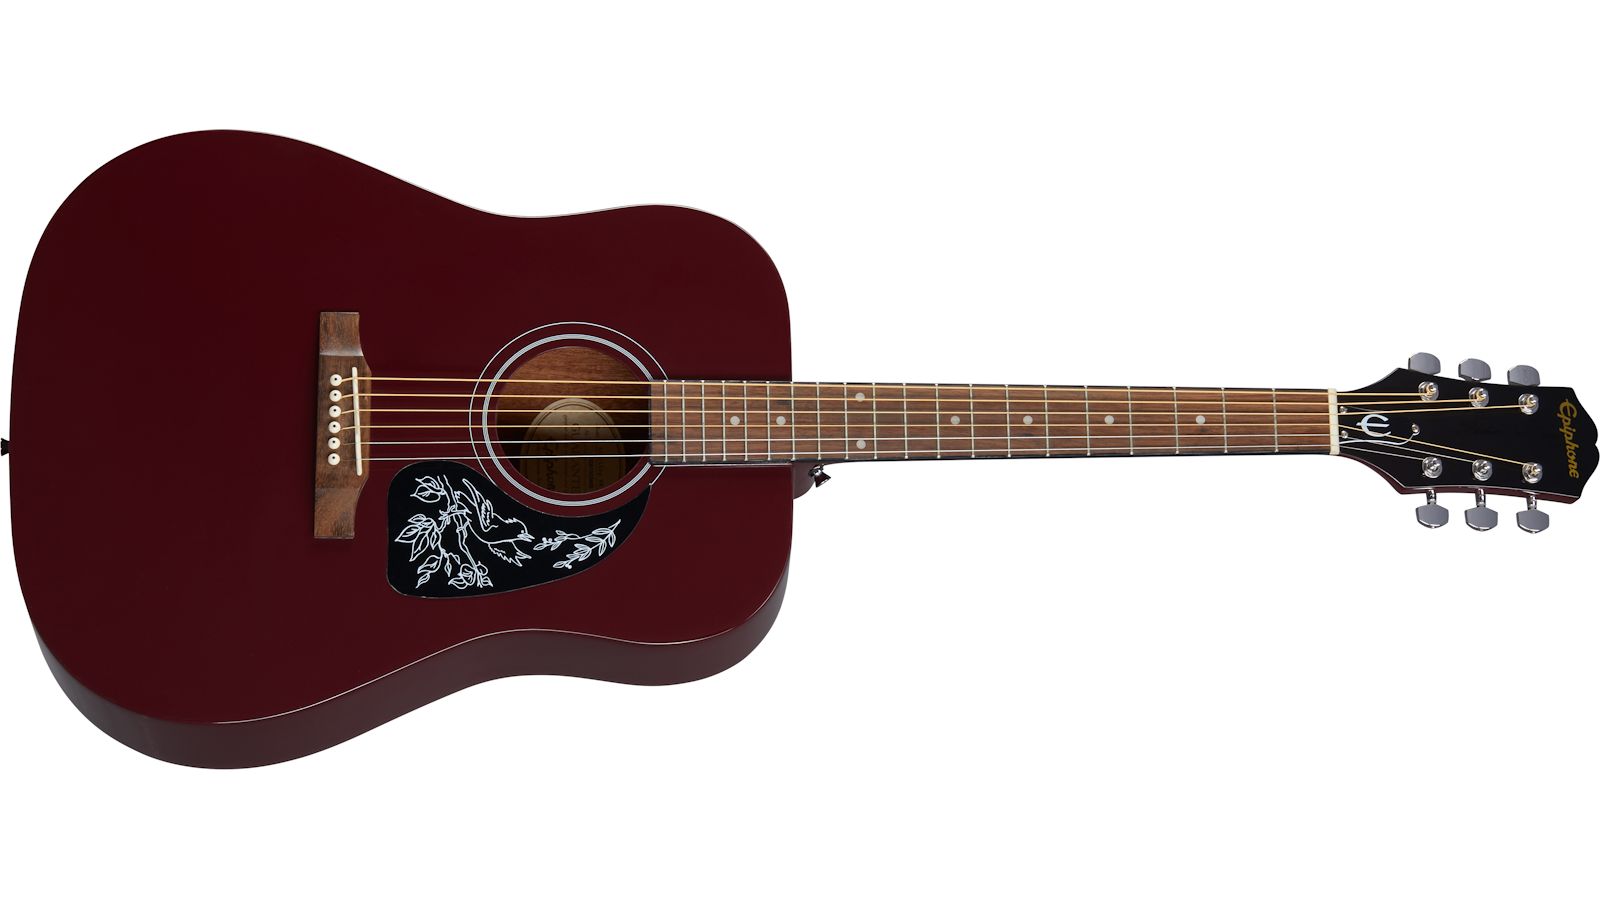 Epiphone Starling Wine Red